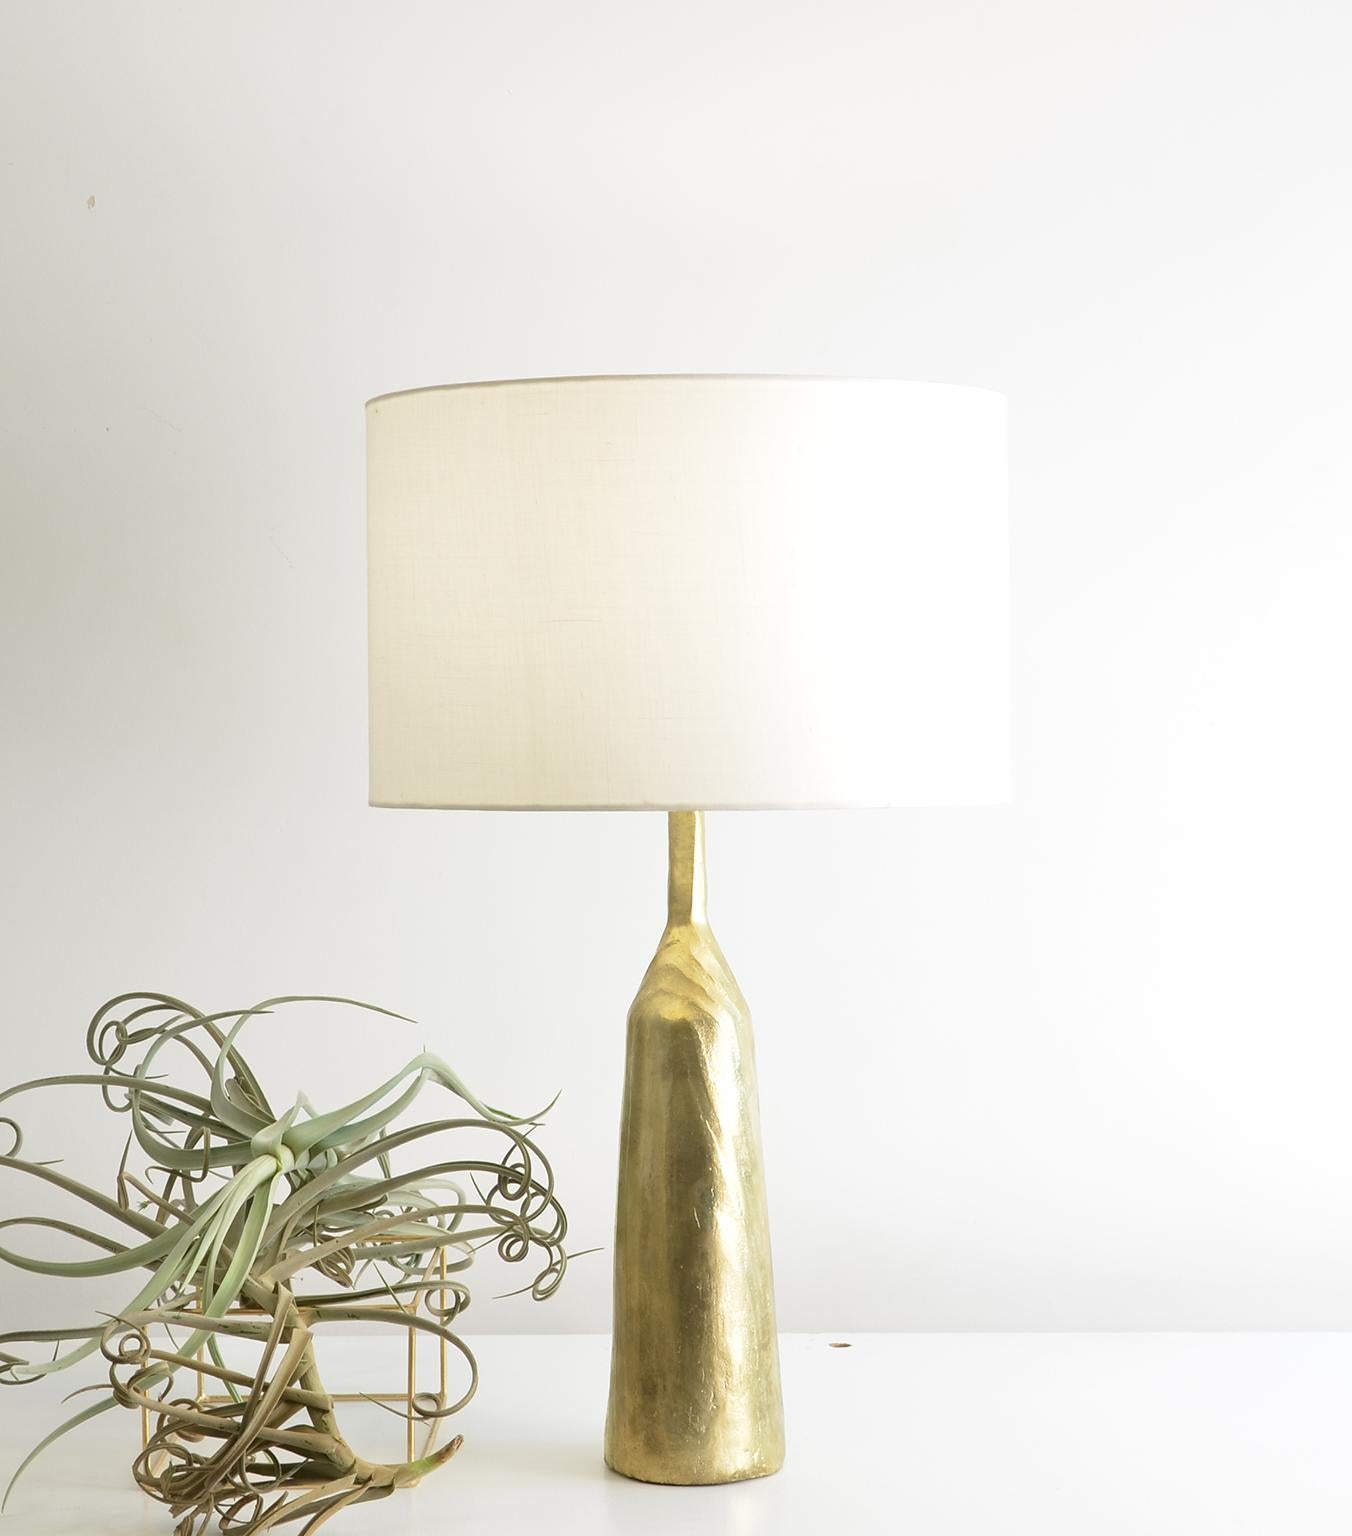 Morandi contemporary Minimalist table lamp.
Table lamp produced in cast bronze.
The model for the foundry was made with carbonized wood to give the desired texture effect. 
The design of this lamp was inspired by Italian artist Giorgio Morandi.